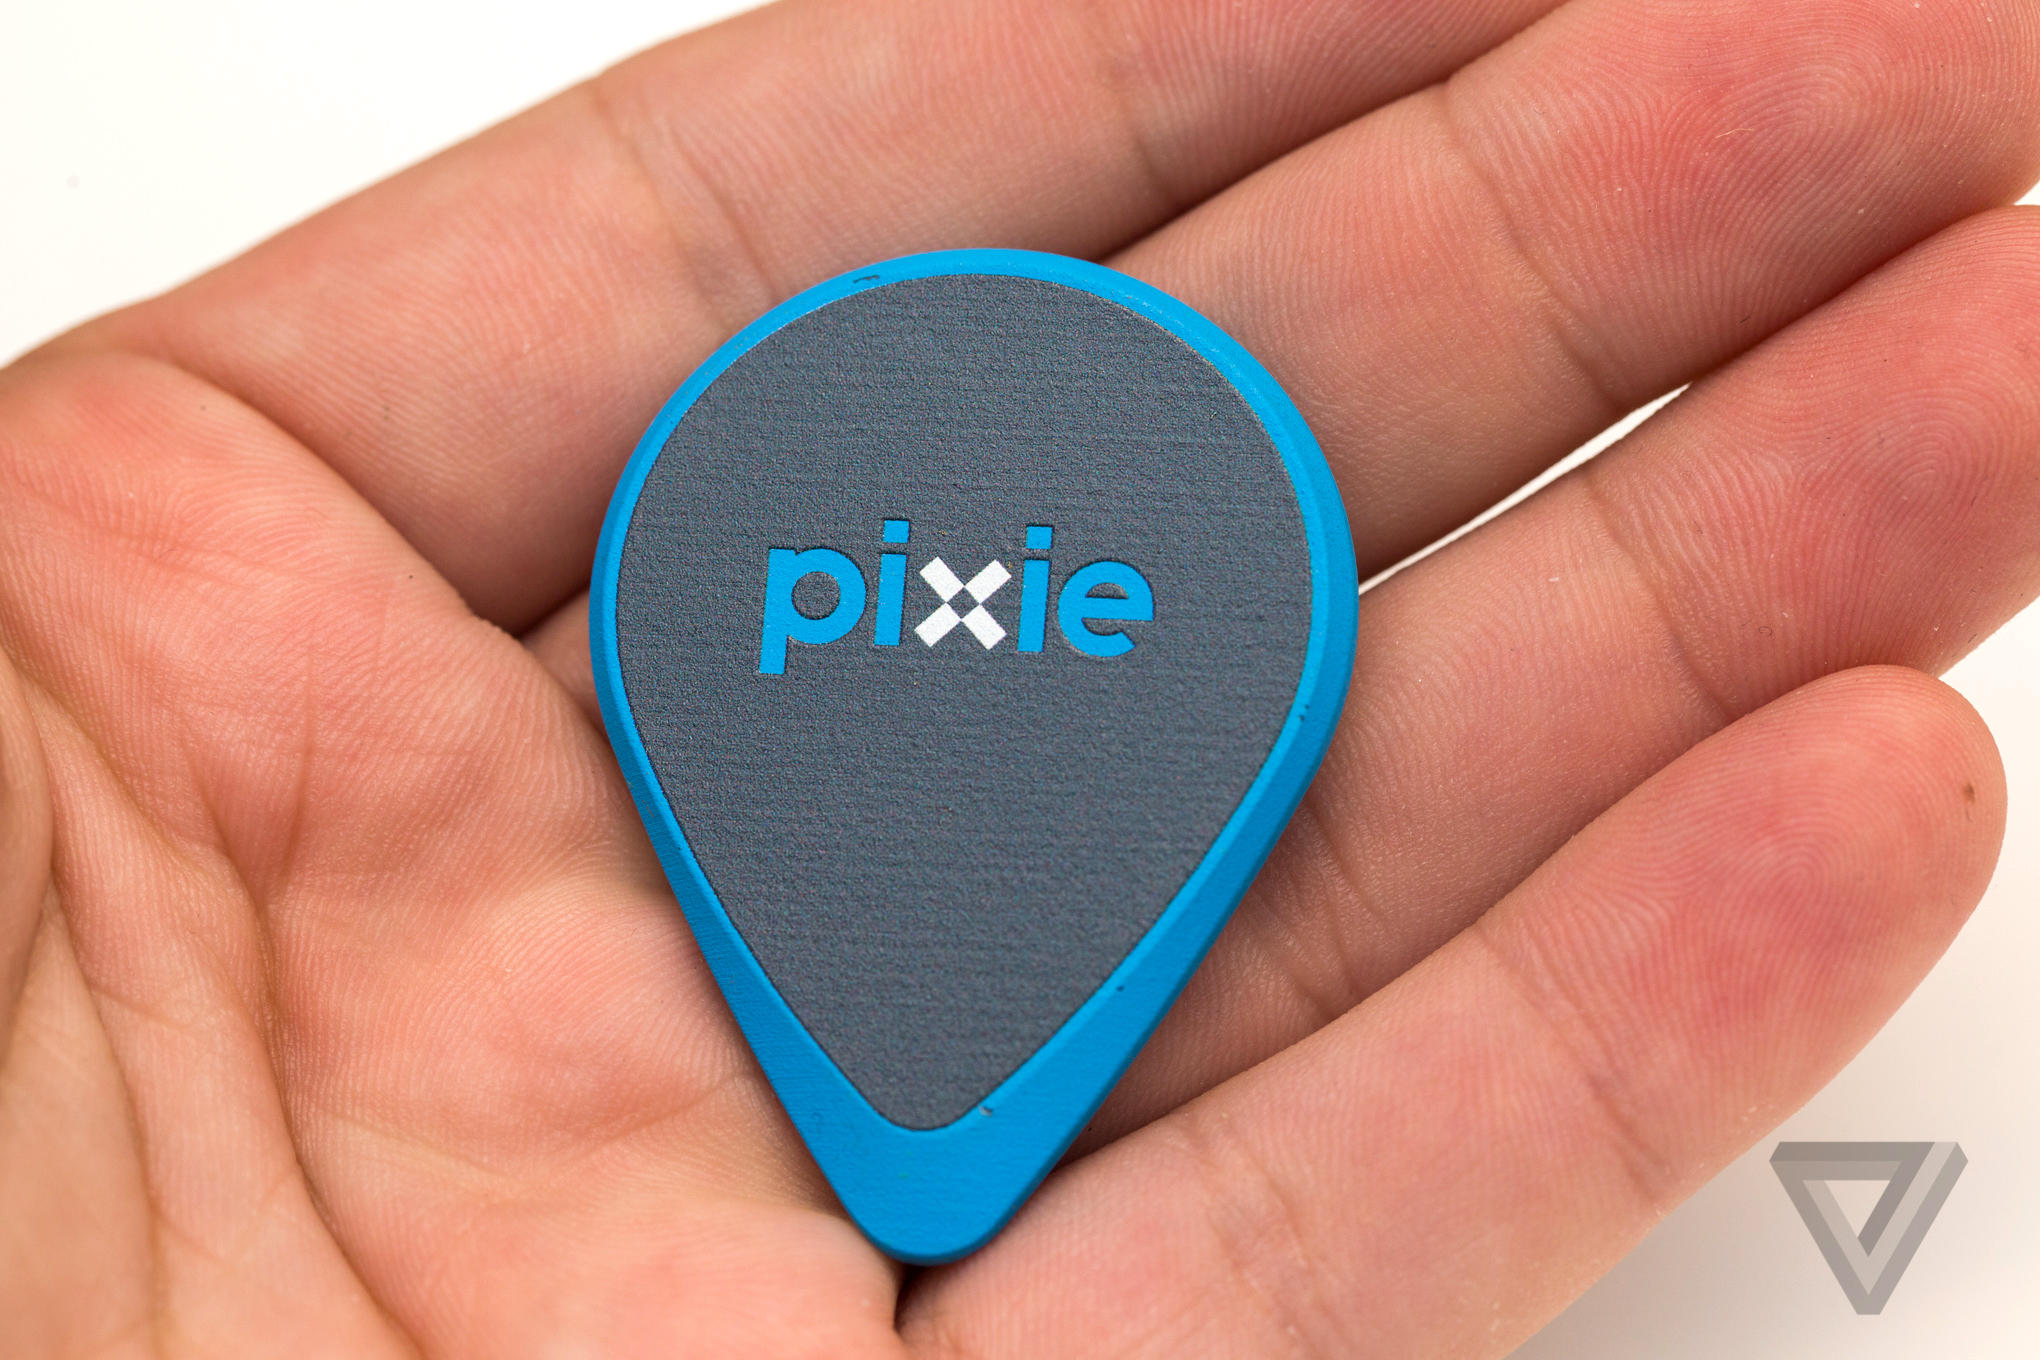 Pixie Point bluetooth tags